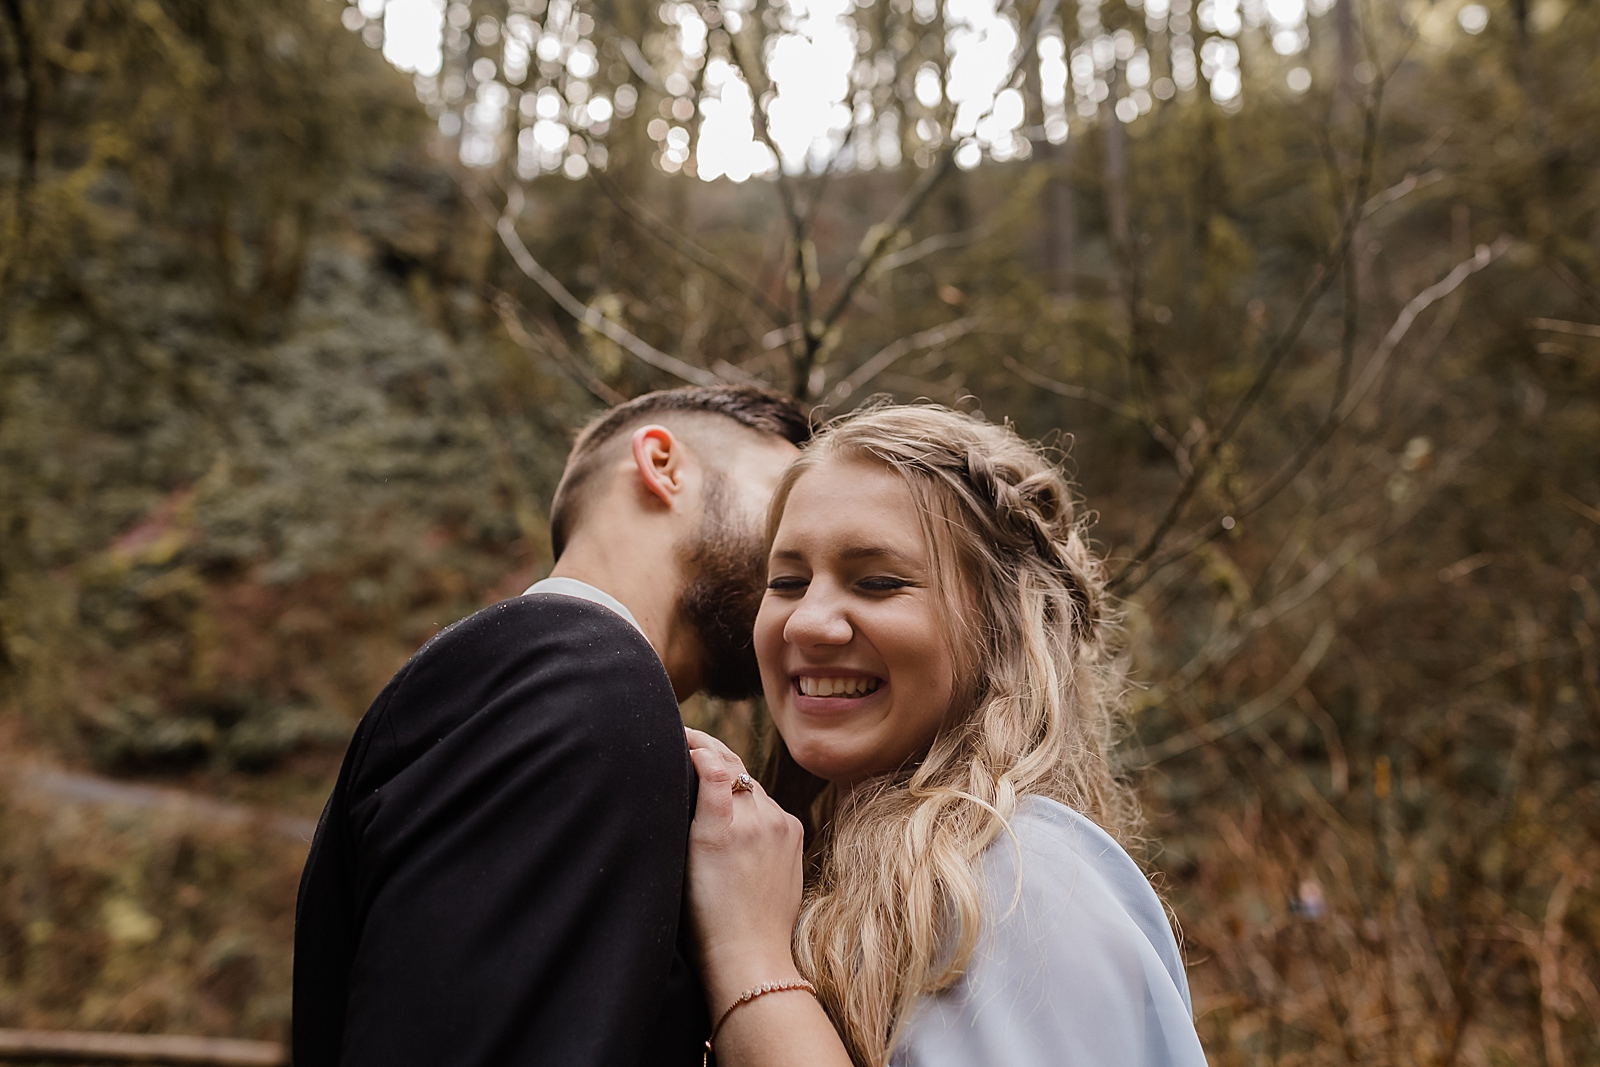 Man kissing lady on the cheek in the forest Silver Falls State Park Oregon Adventure Photography captured by Simply Wandering Photography 